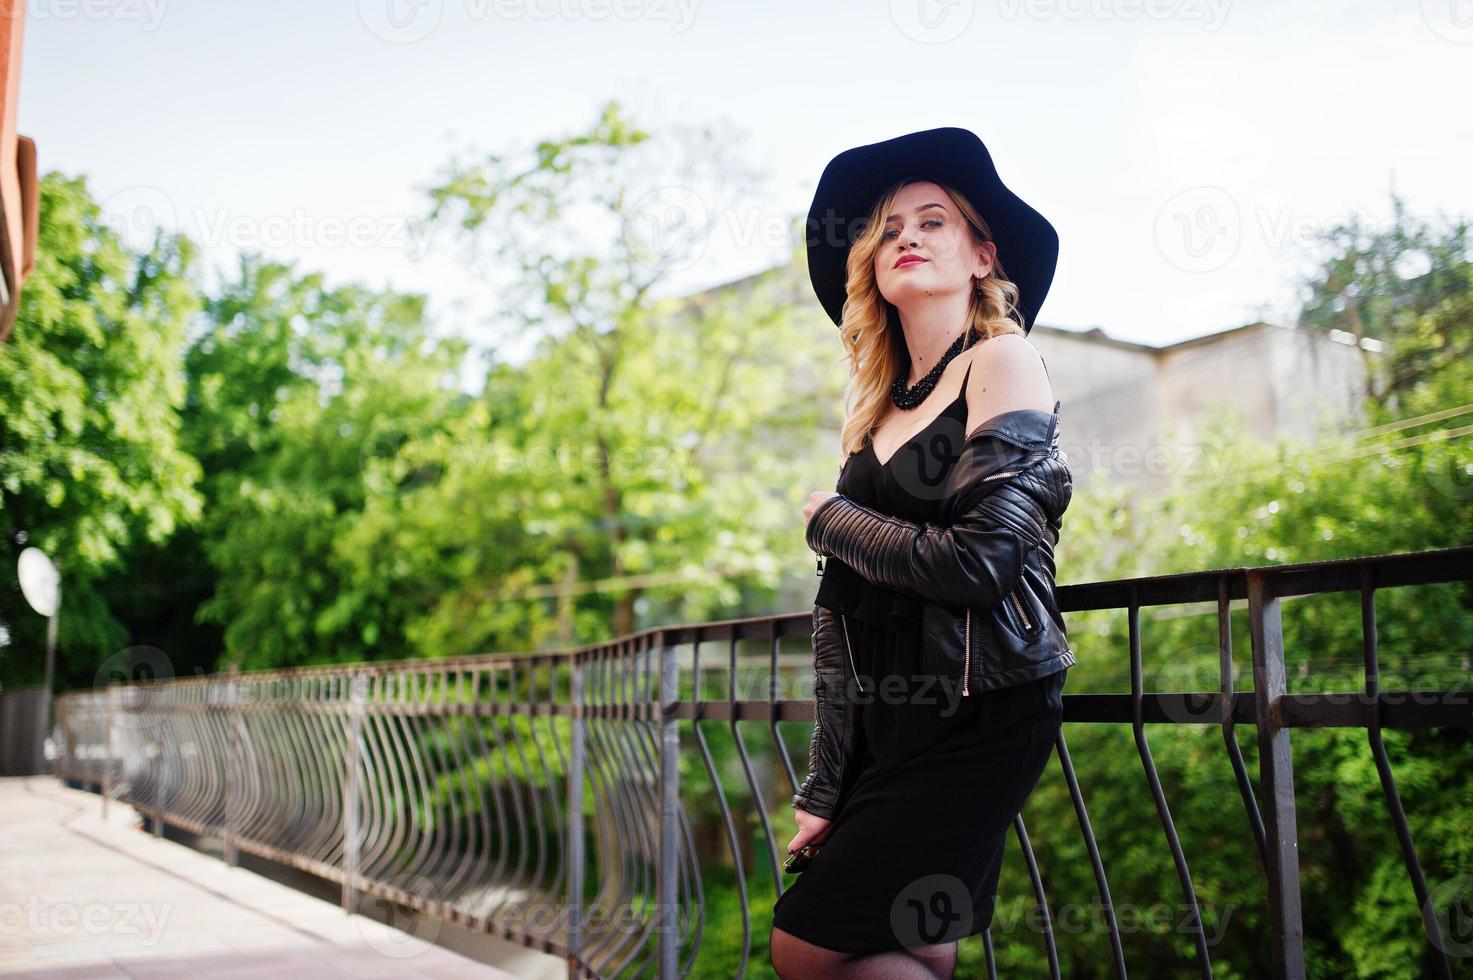 Blonde woman on black dress, leather jacket, necklaces and hat agains railings. photo